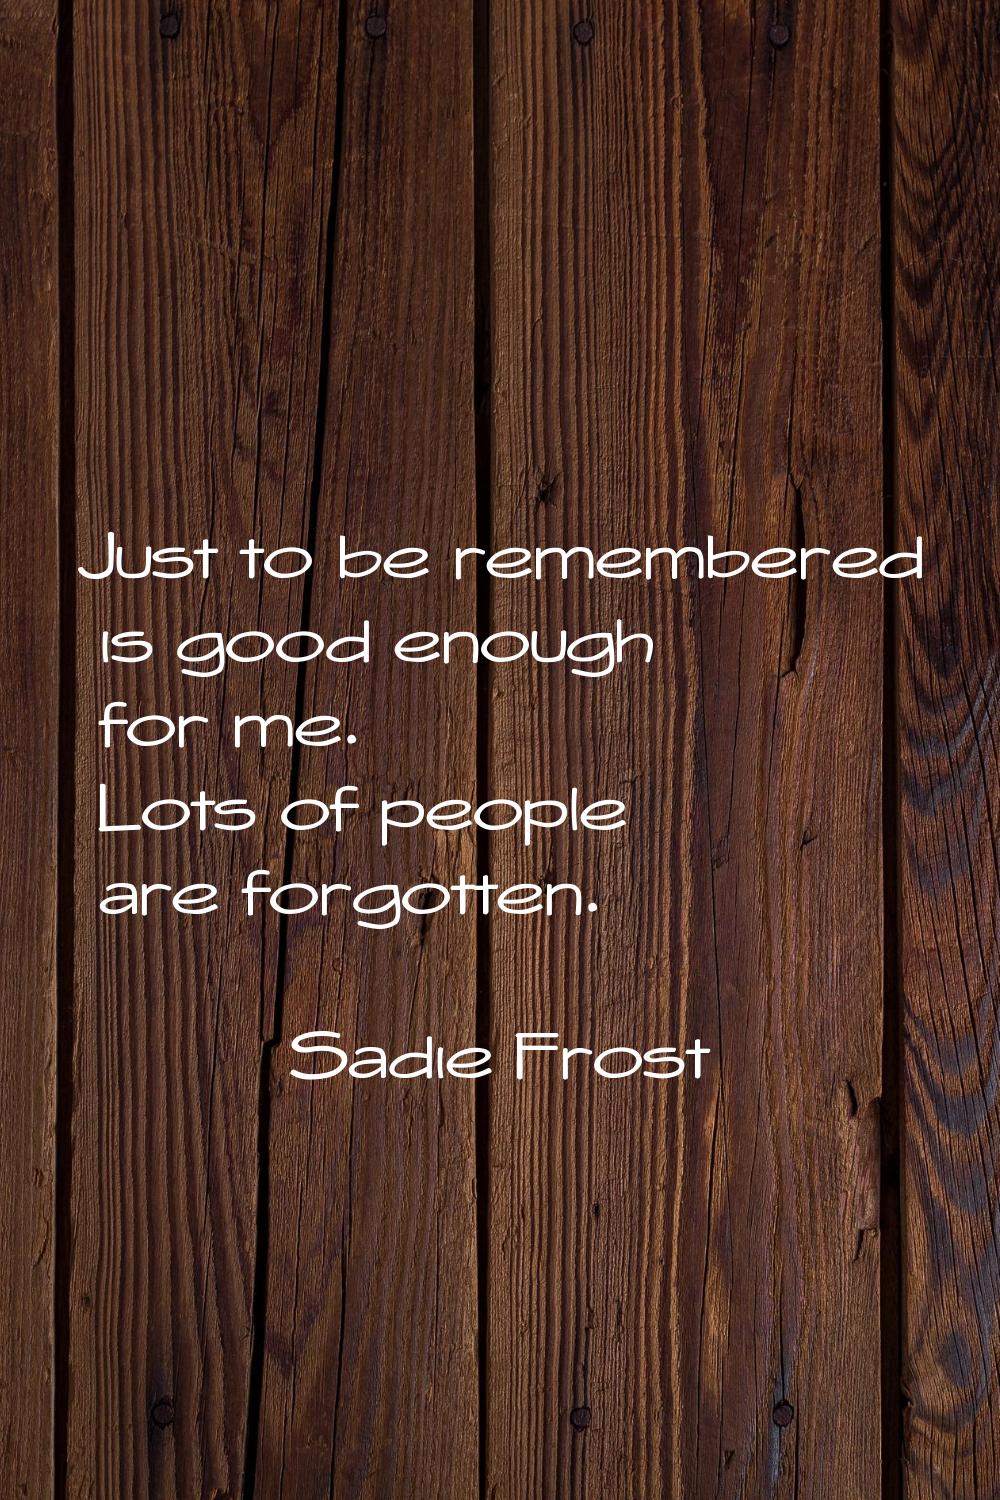 Just to be remembered is good enough for me. Lots of people are forgotten.